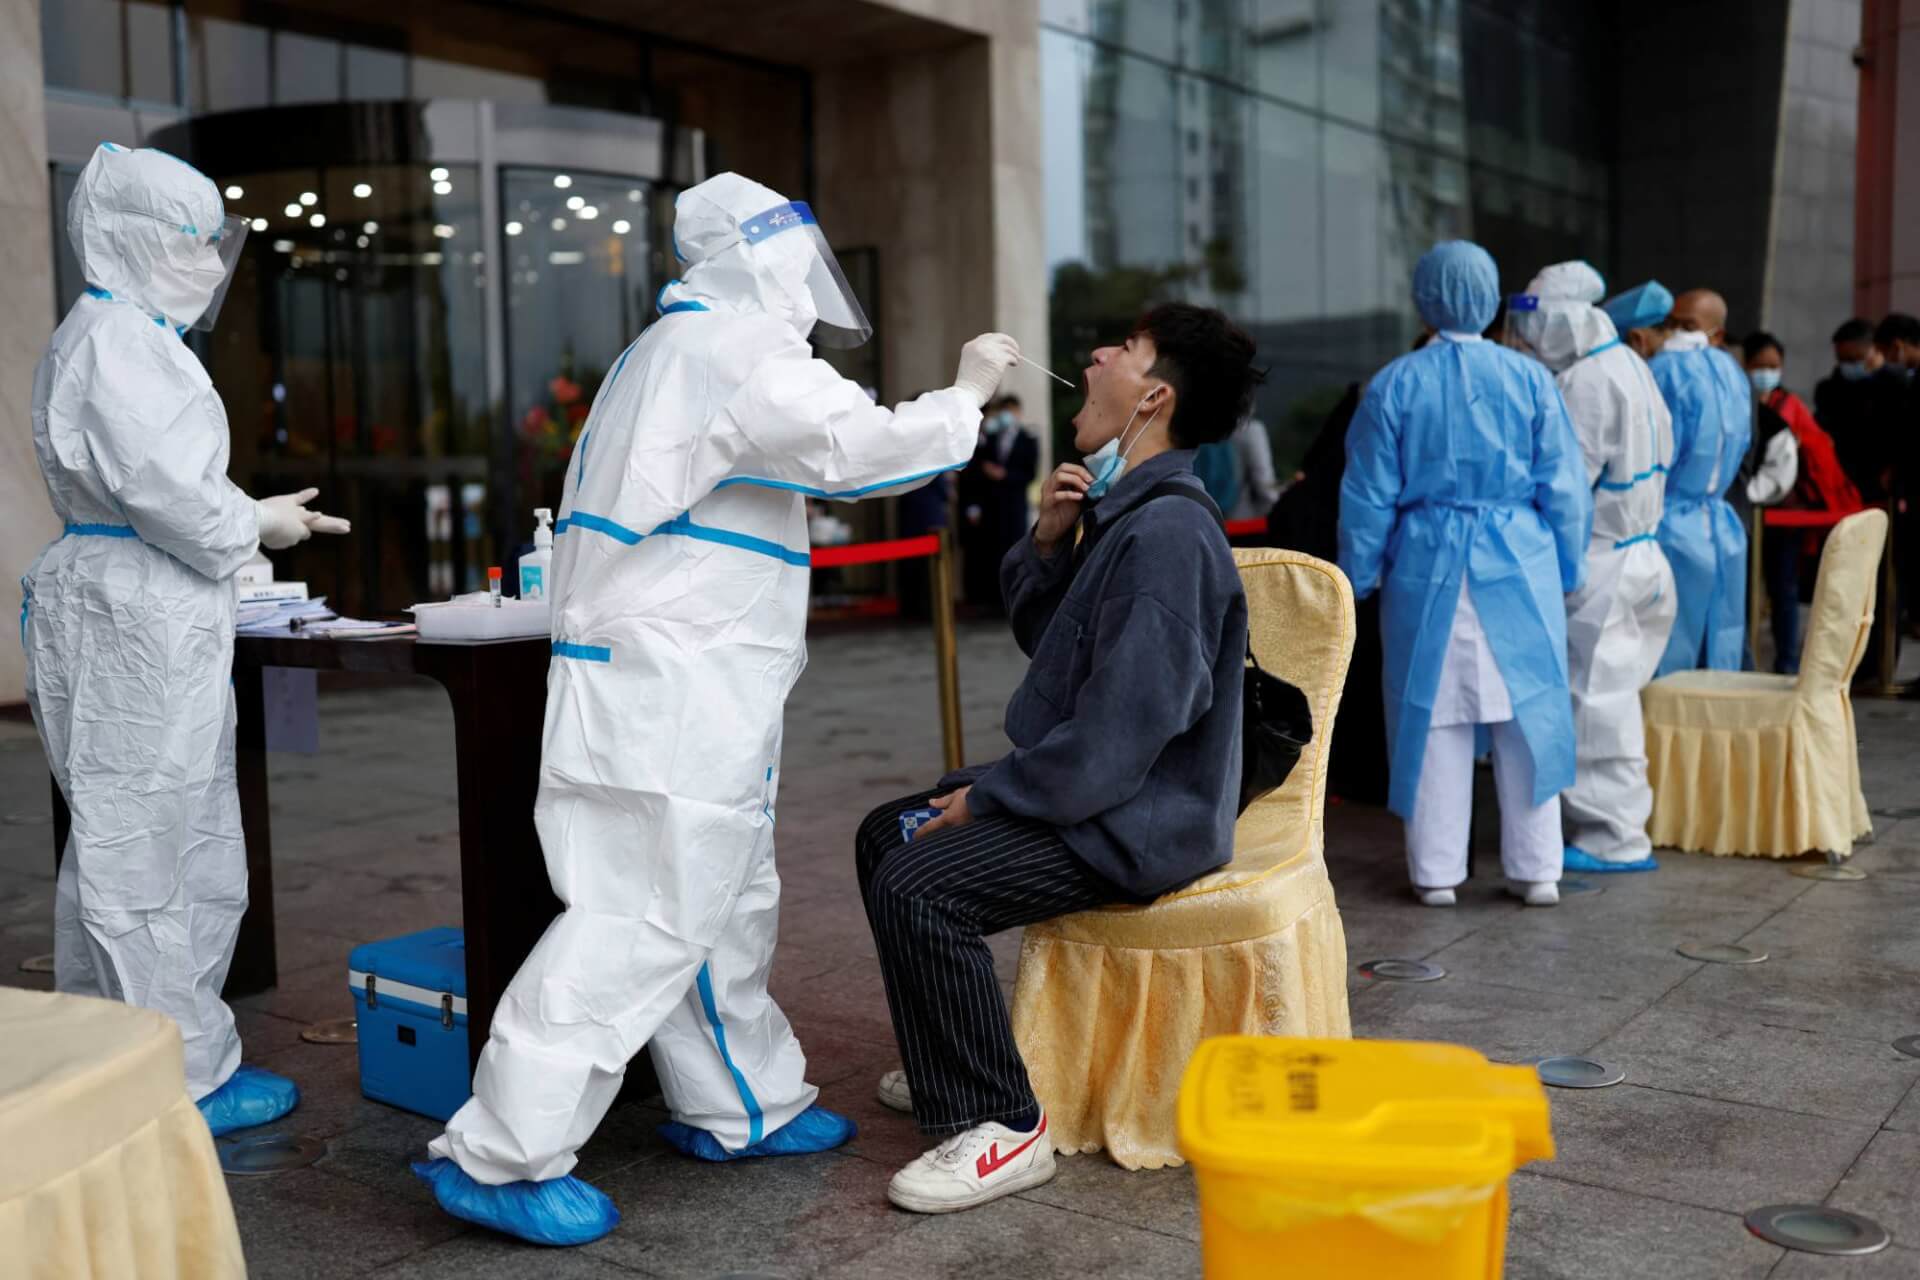 Shanghai Reopens After 6 Weeks as Beijing Faces Lockdown Amid Spiralling COVID-19 Outbreak